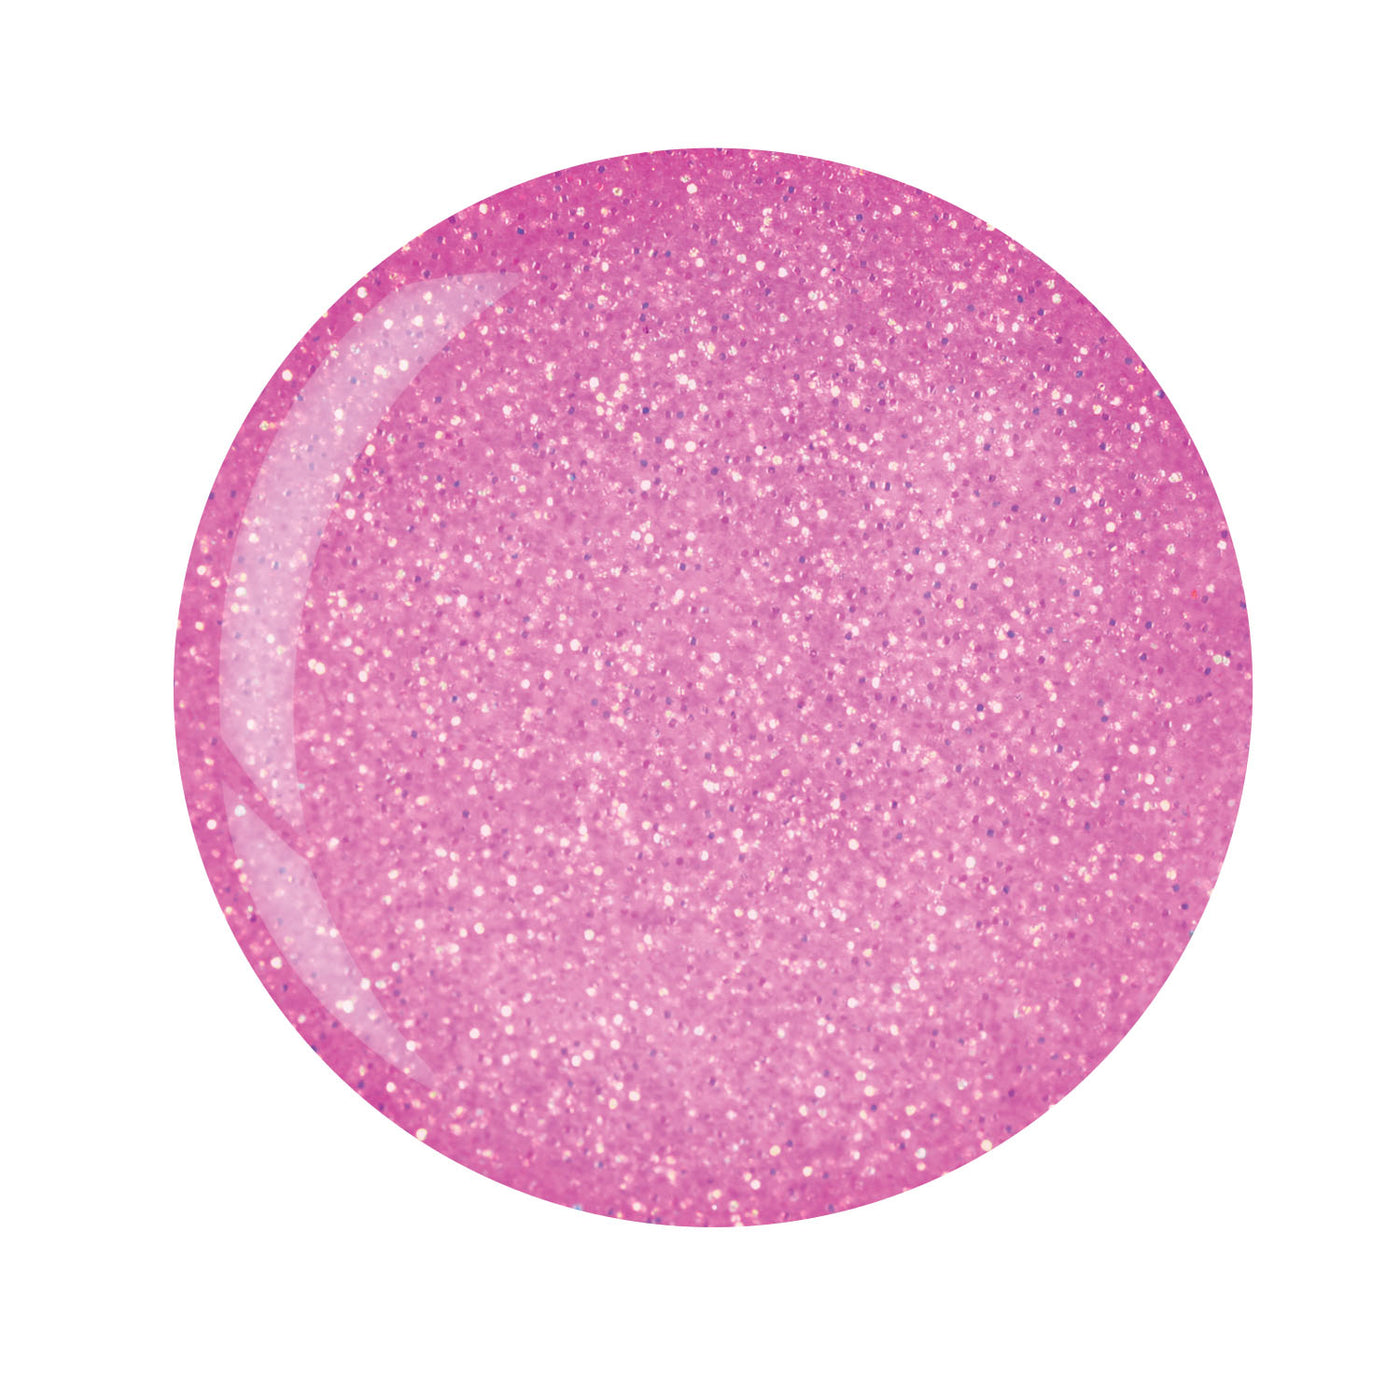 CP Dipping Powder14g - 5563-5 Baby Pink Glitter